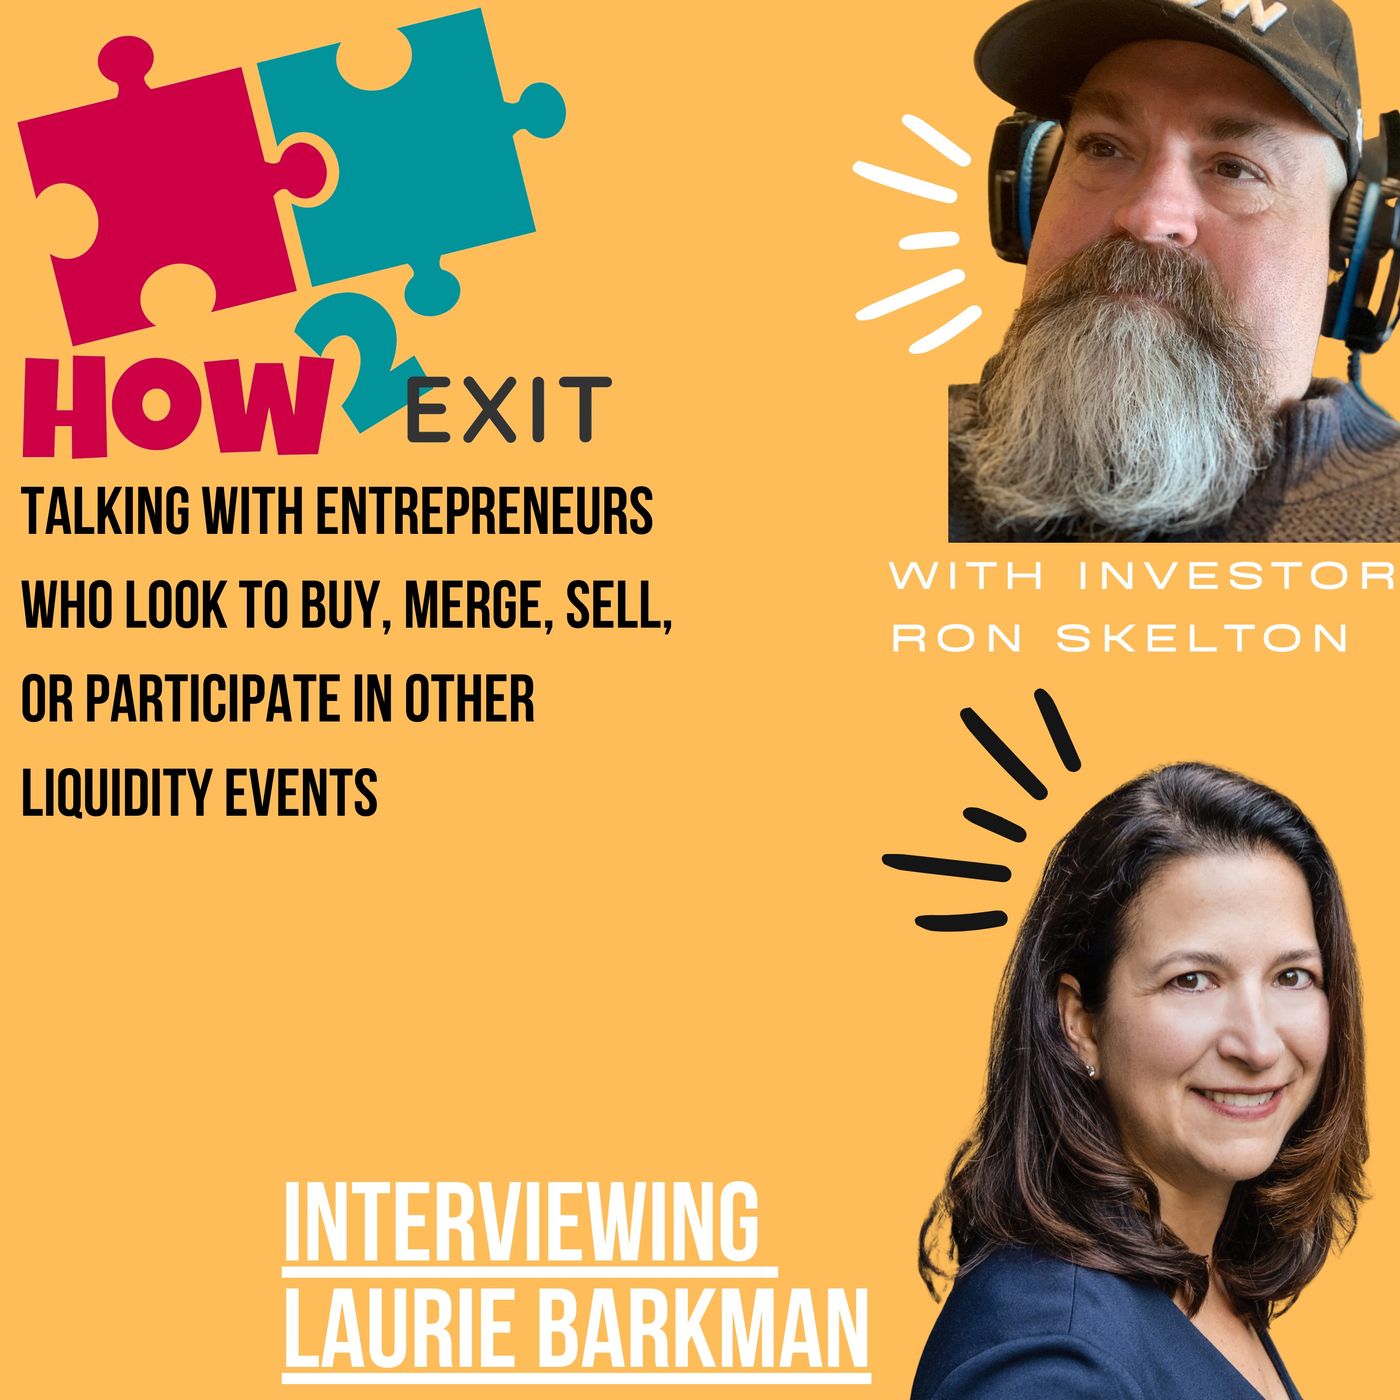 How2Exit Episode 29: Laurie Barkman - former CEO and a "business transition sherpa"Laurie Barkman is a "business transition sherpa." With he Image